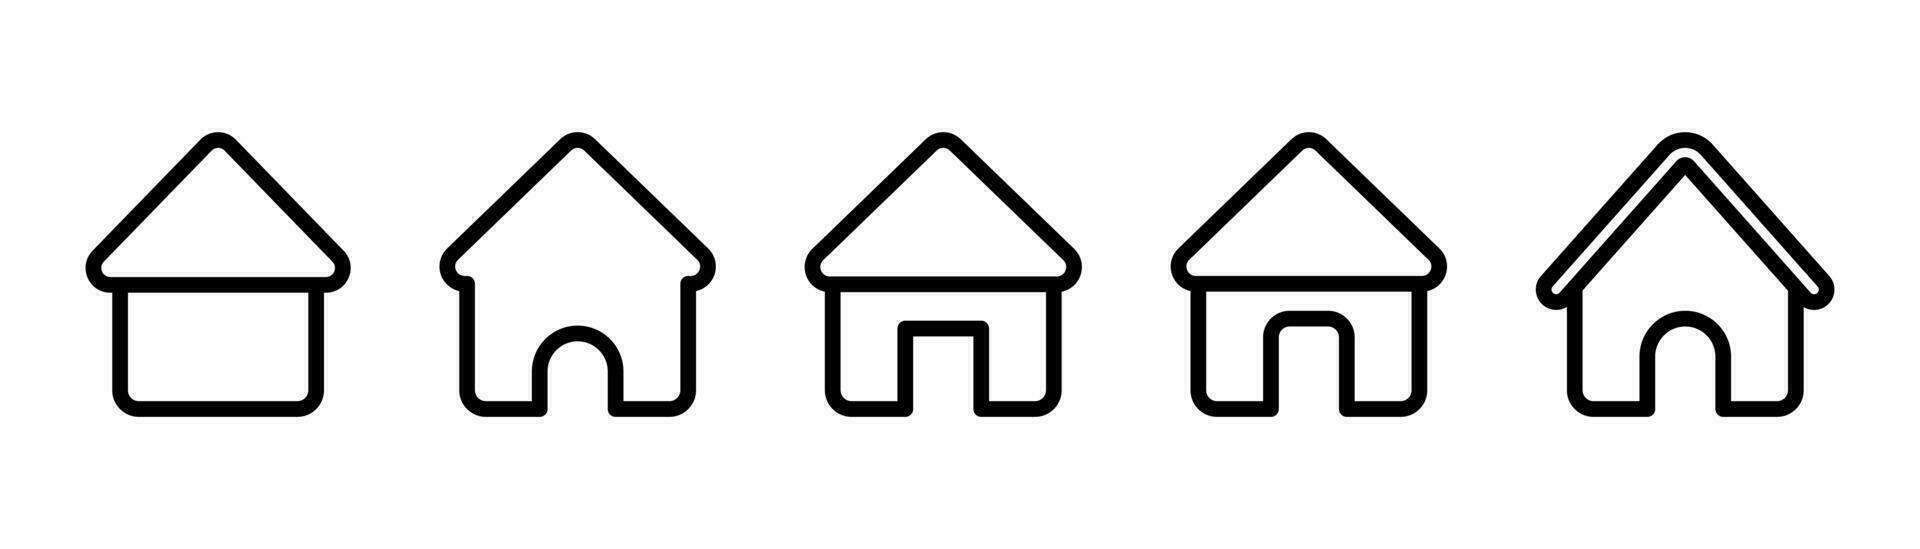 Home icon set. Outline house symbol. Home icon in black. Line house silhouette. Outline home pictogram in vector